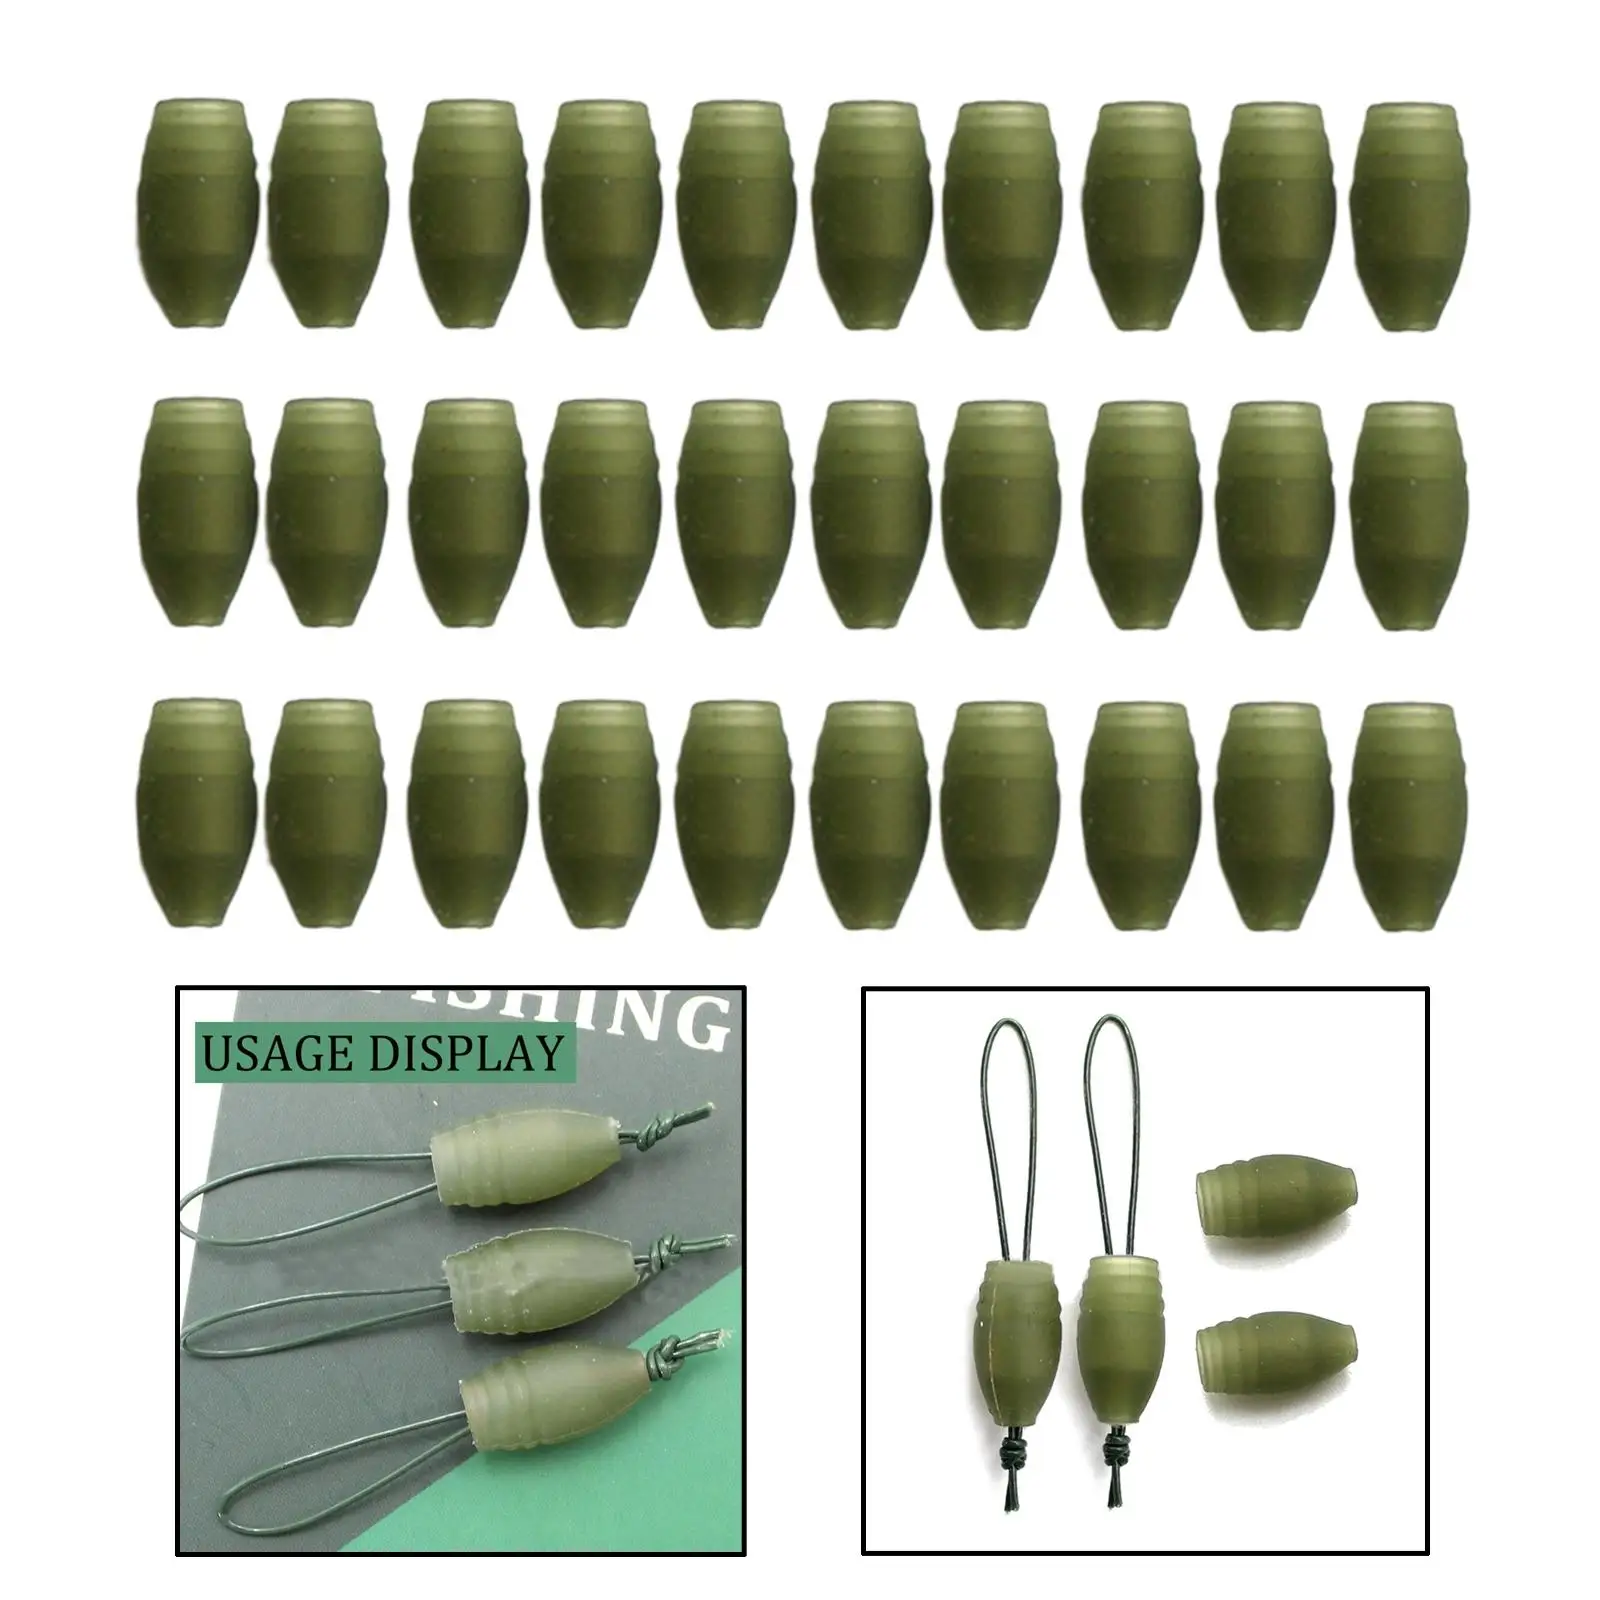 30 Pieces Elastic Dacron Connectors Carp Fishing Tool Plastic for Fishing Tackle Rigs Coarse Stop Bead Solid and Hollow Pole Tip